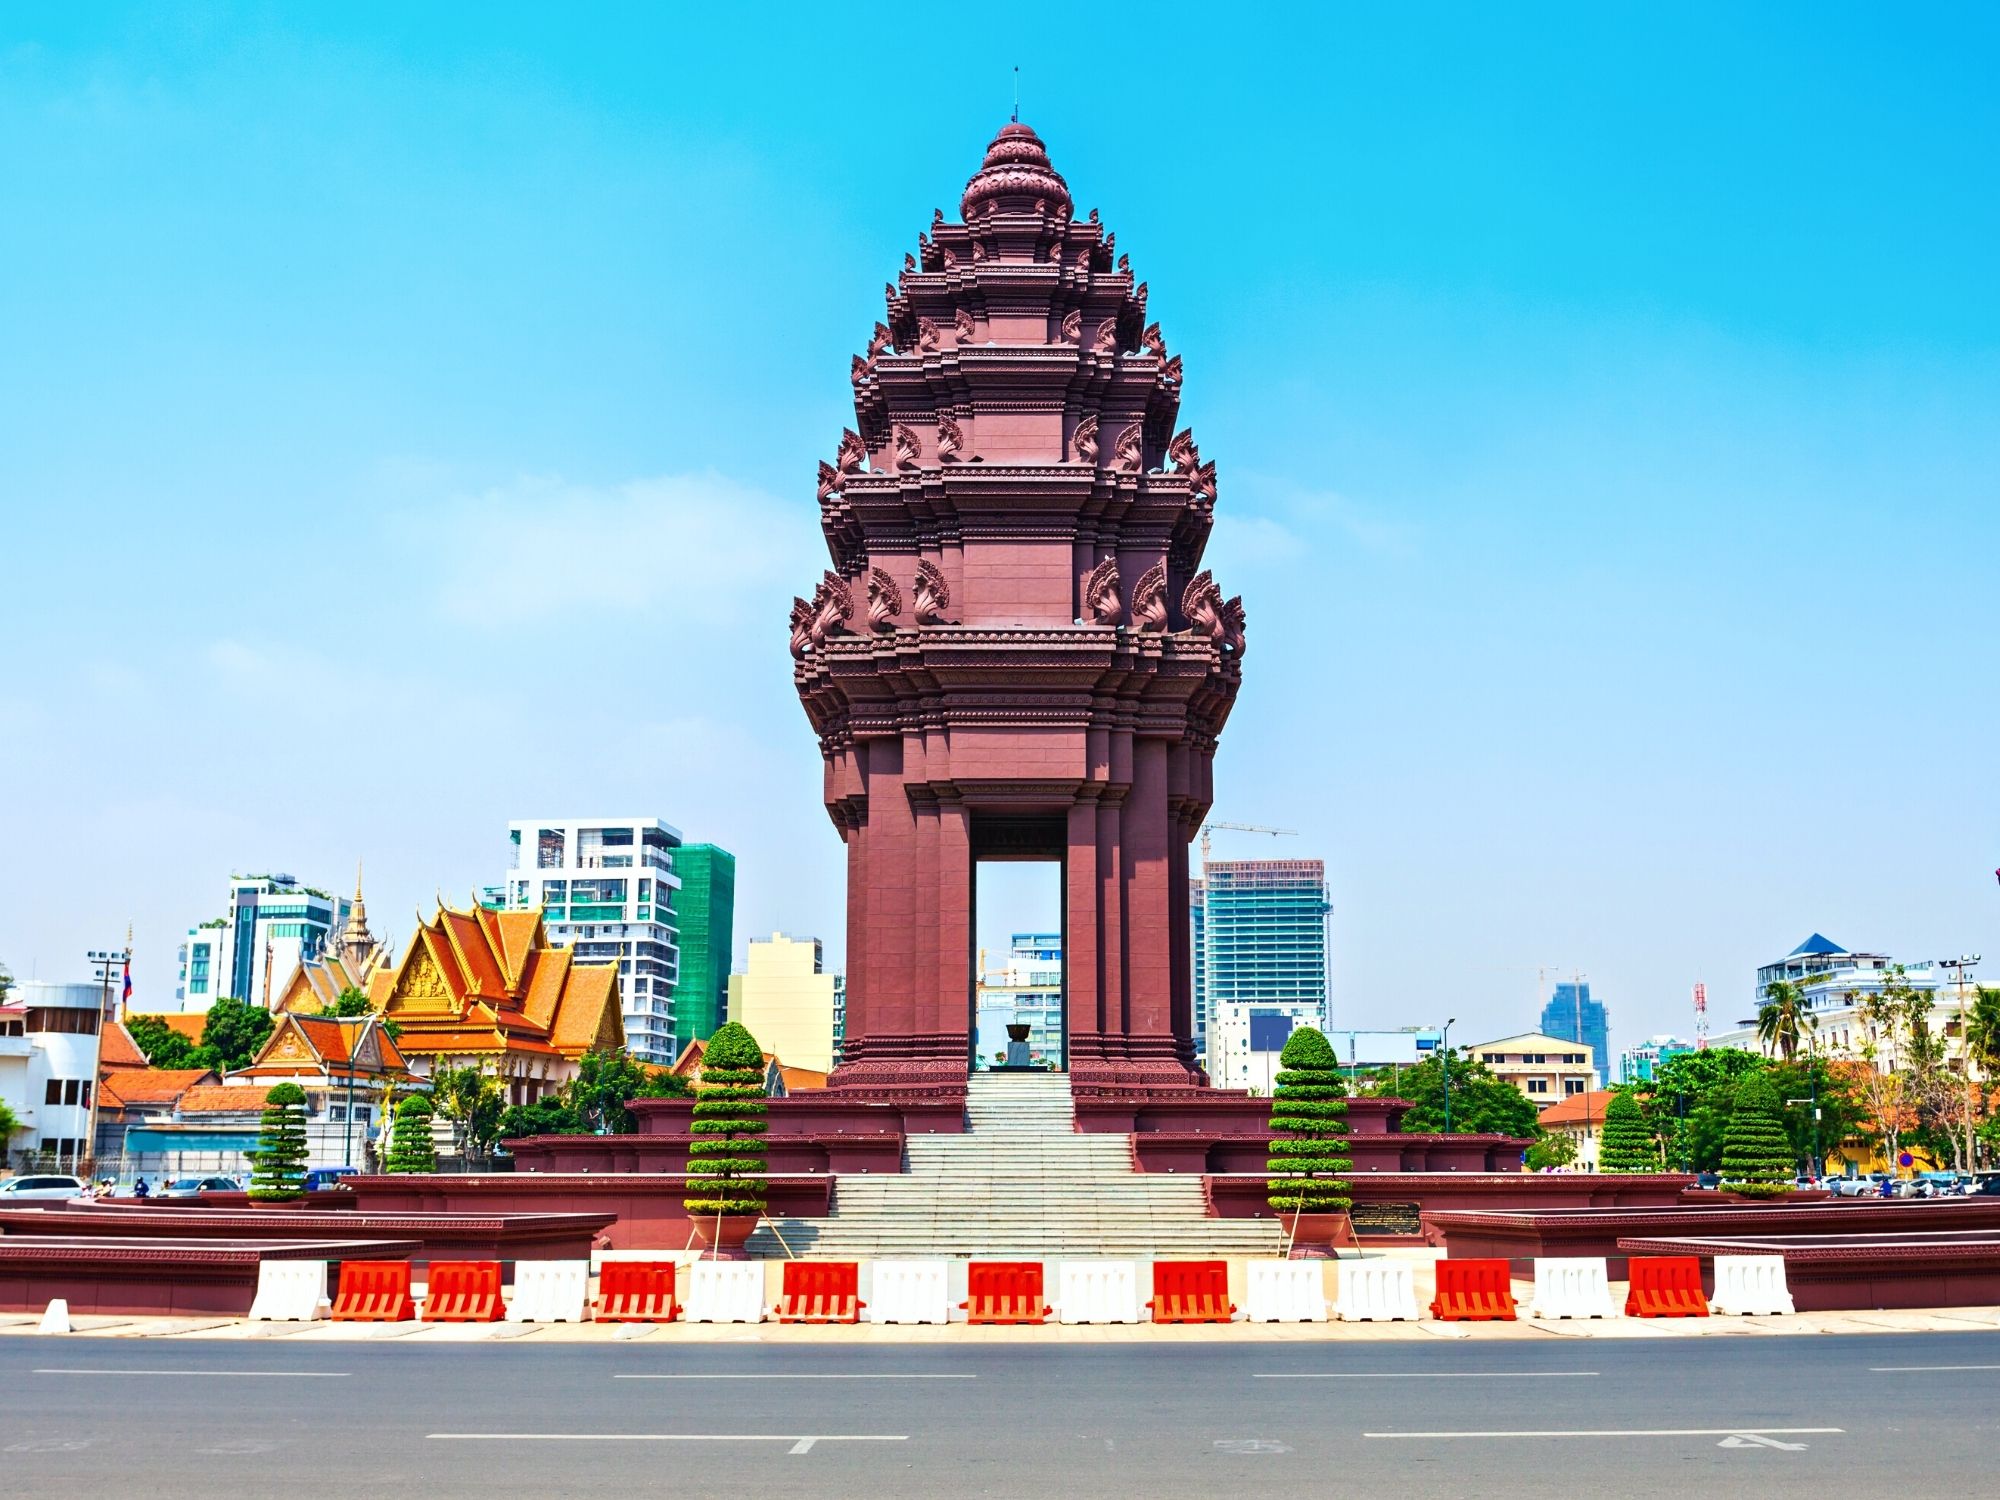 Independence Monument when seen during the day in Phnom Penh, Cambodia